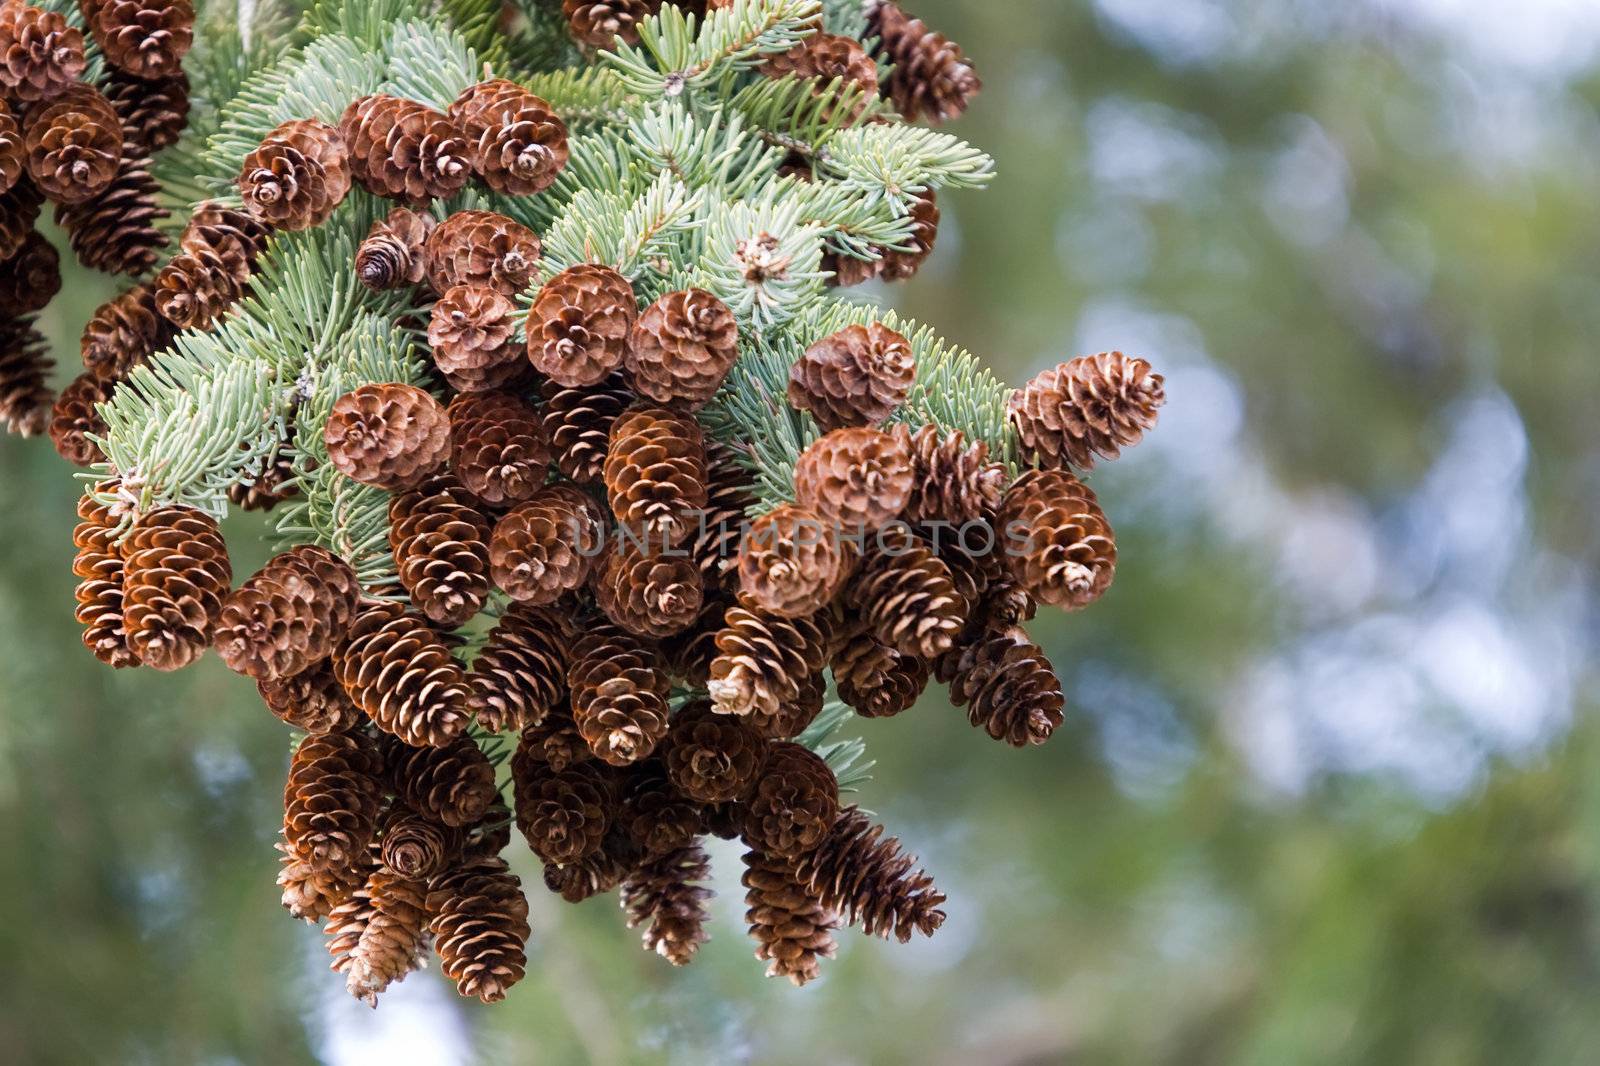 Closeup of pine cones, still on the branch, with a blurred background.